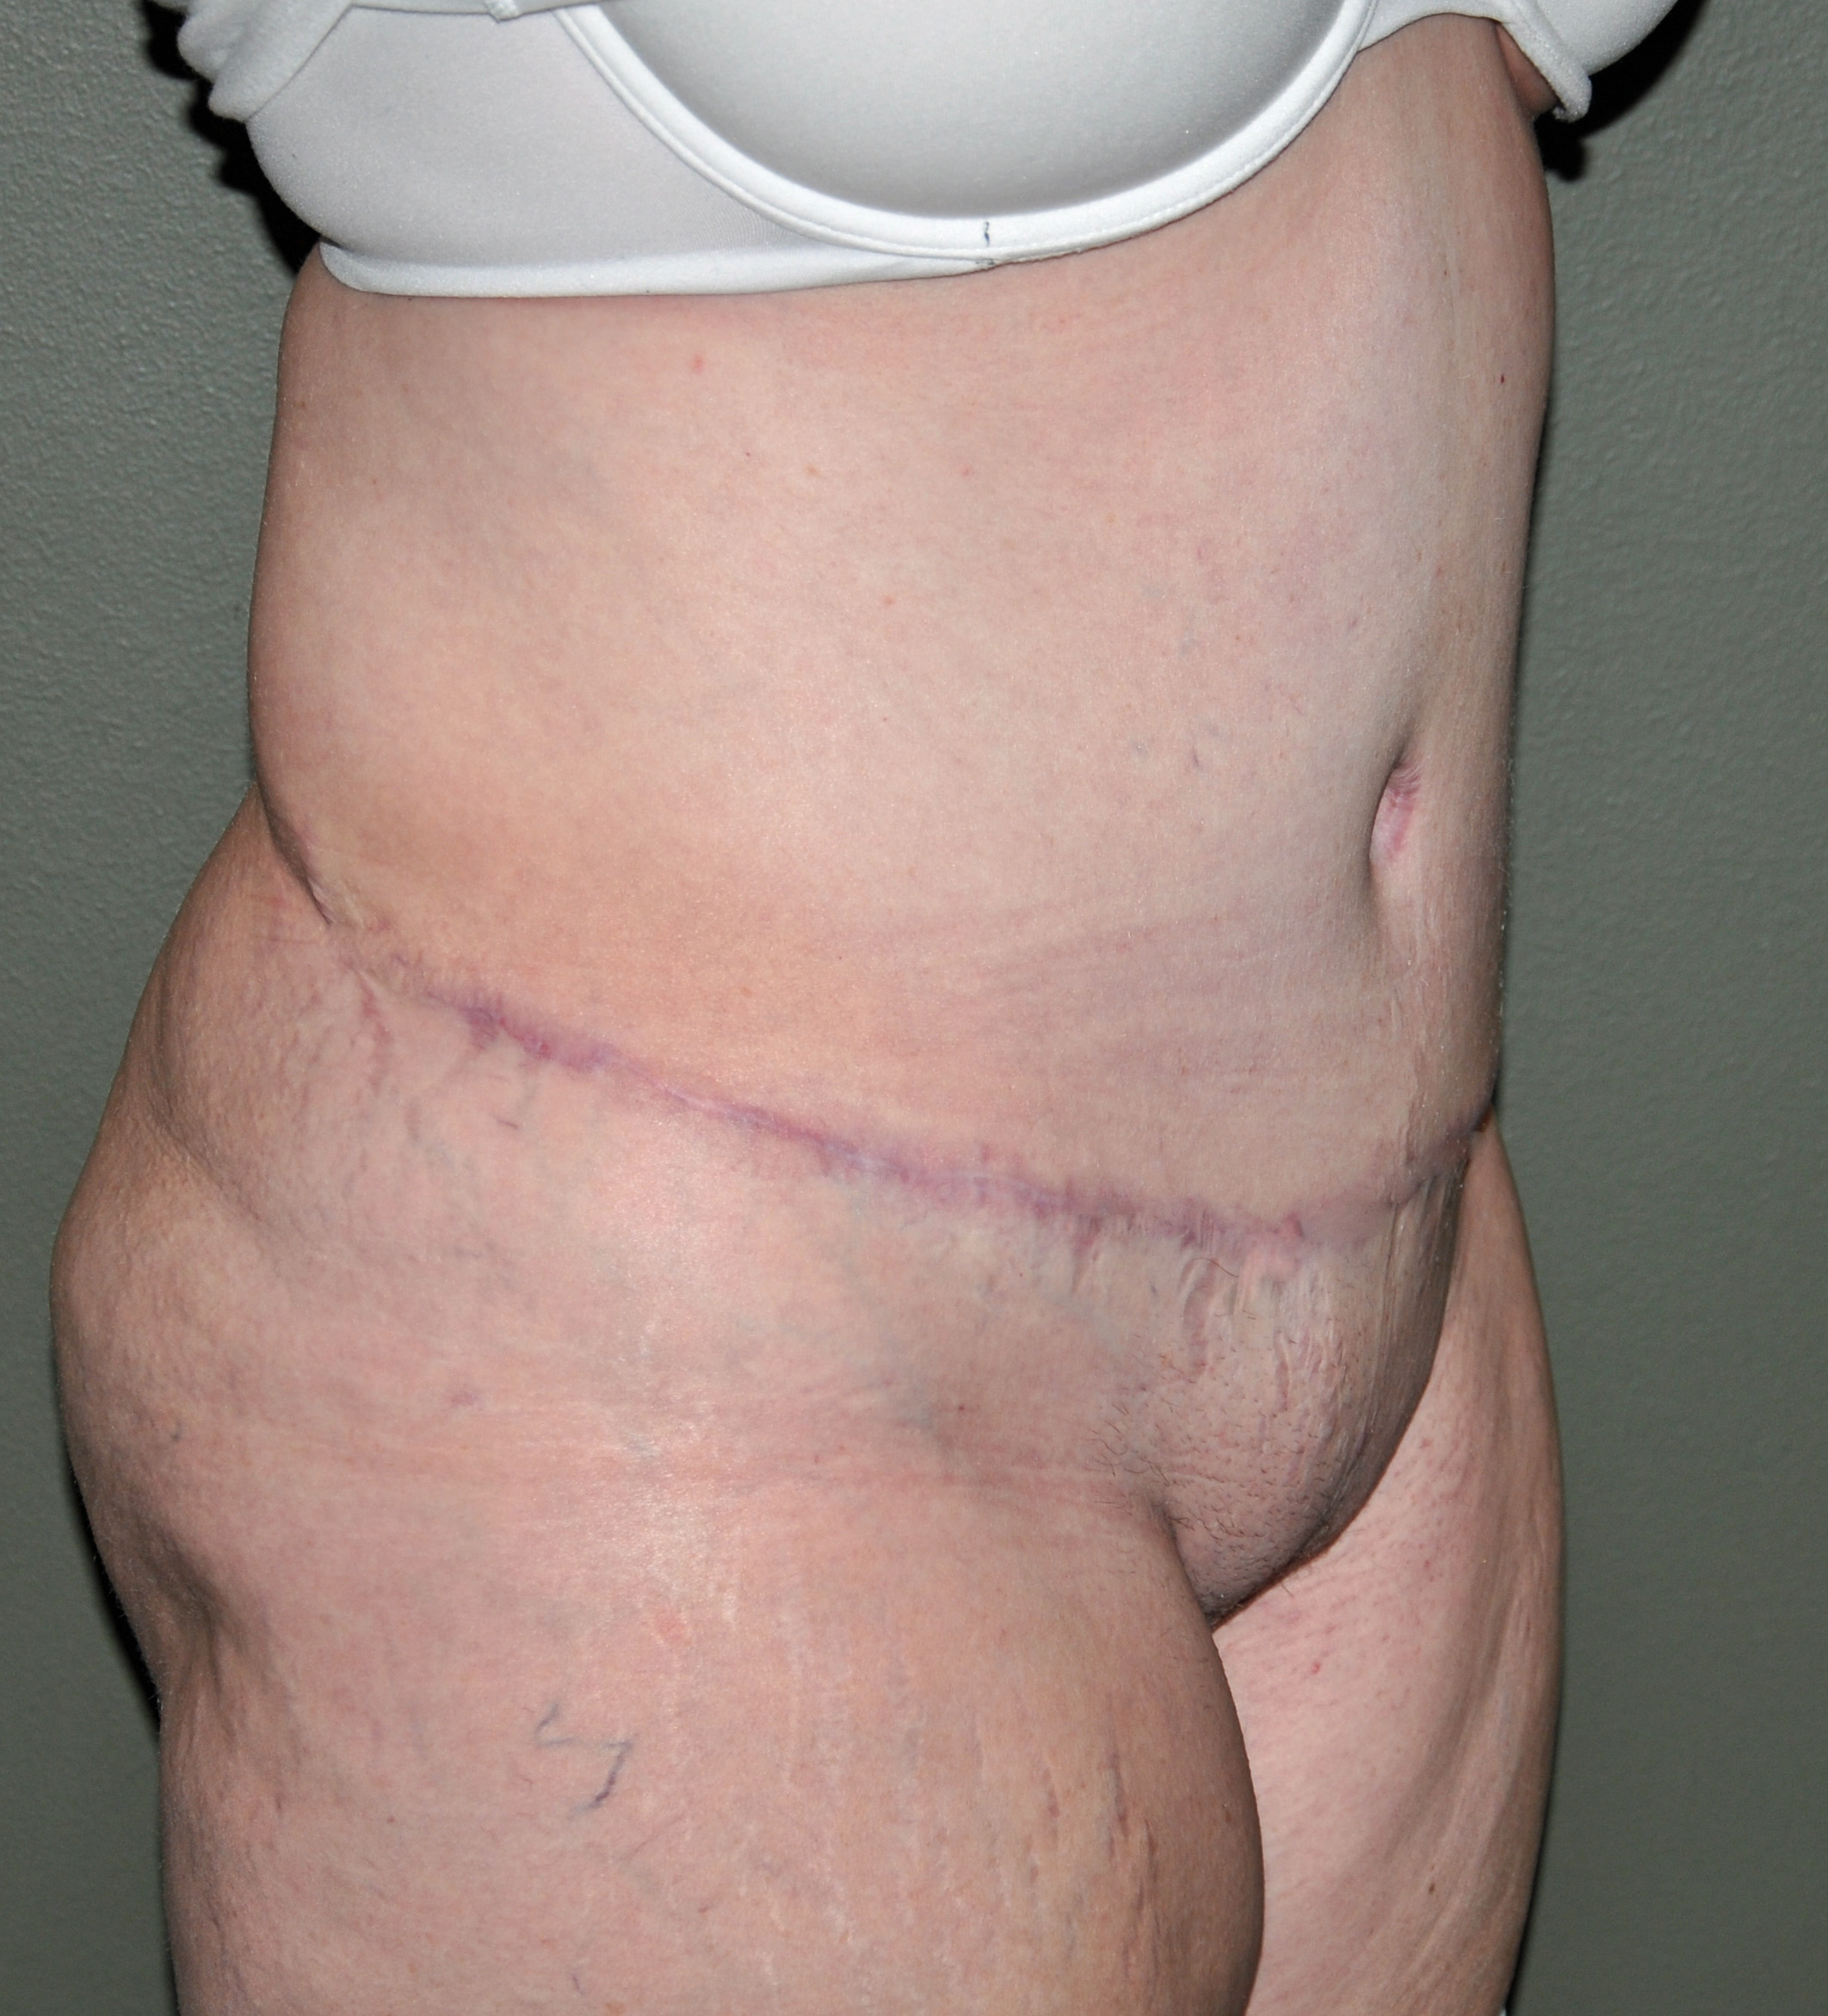 The Male Tummy Tuck after Massive Weight Loss - Explore Plastic Surgery